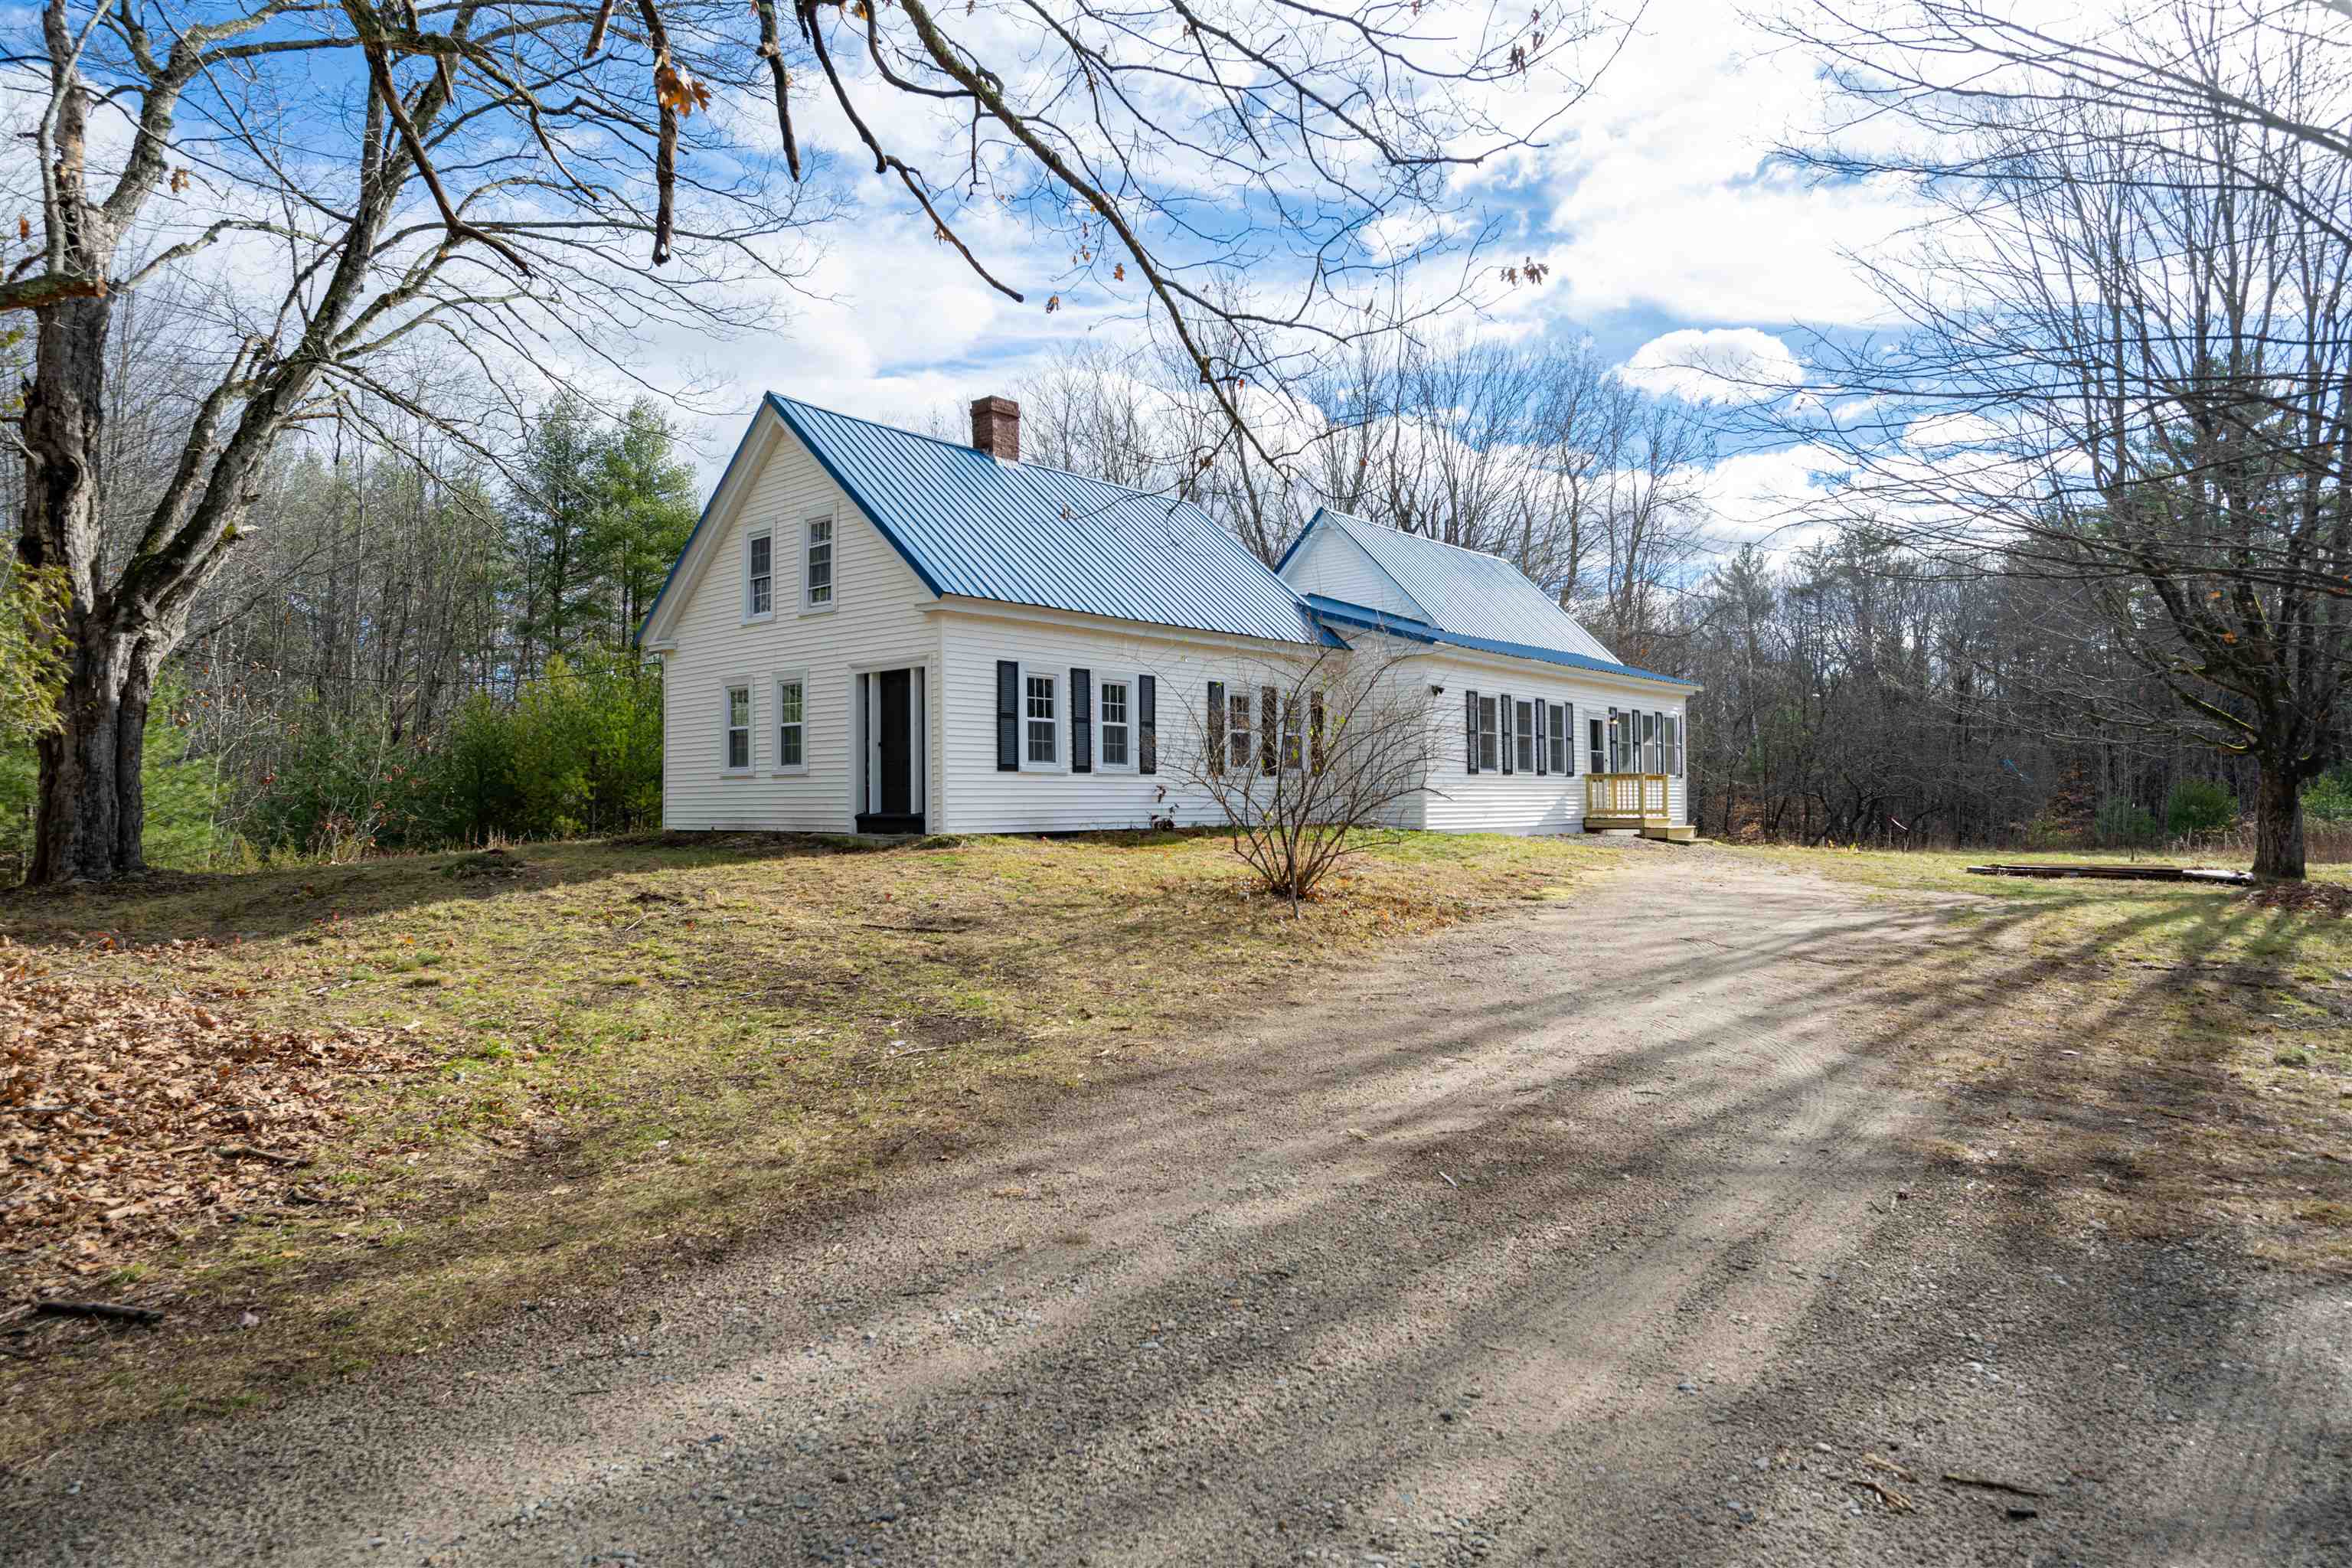 VILLAGE OF SANBORNVILLE IN TOWN OF WAKEFIELD NH Homes for sale